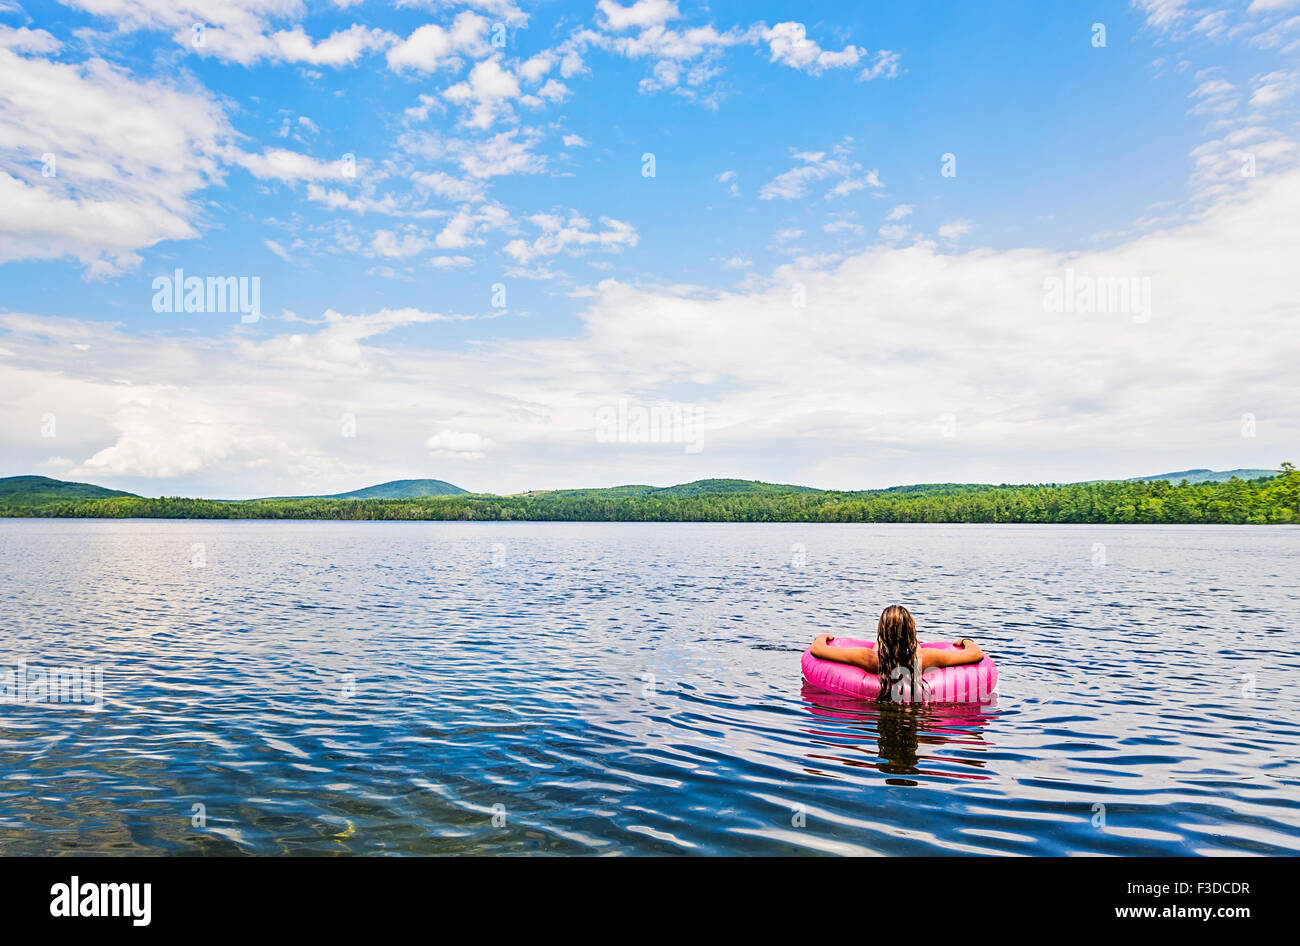 Young woman relaxing on lake in pool raft Stock Photo - Alamy